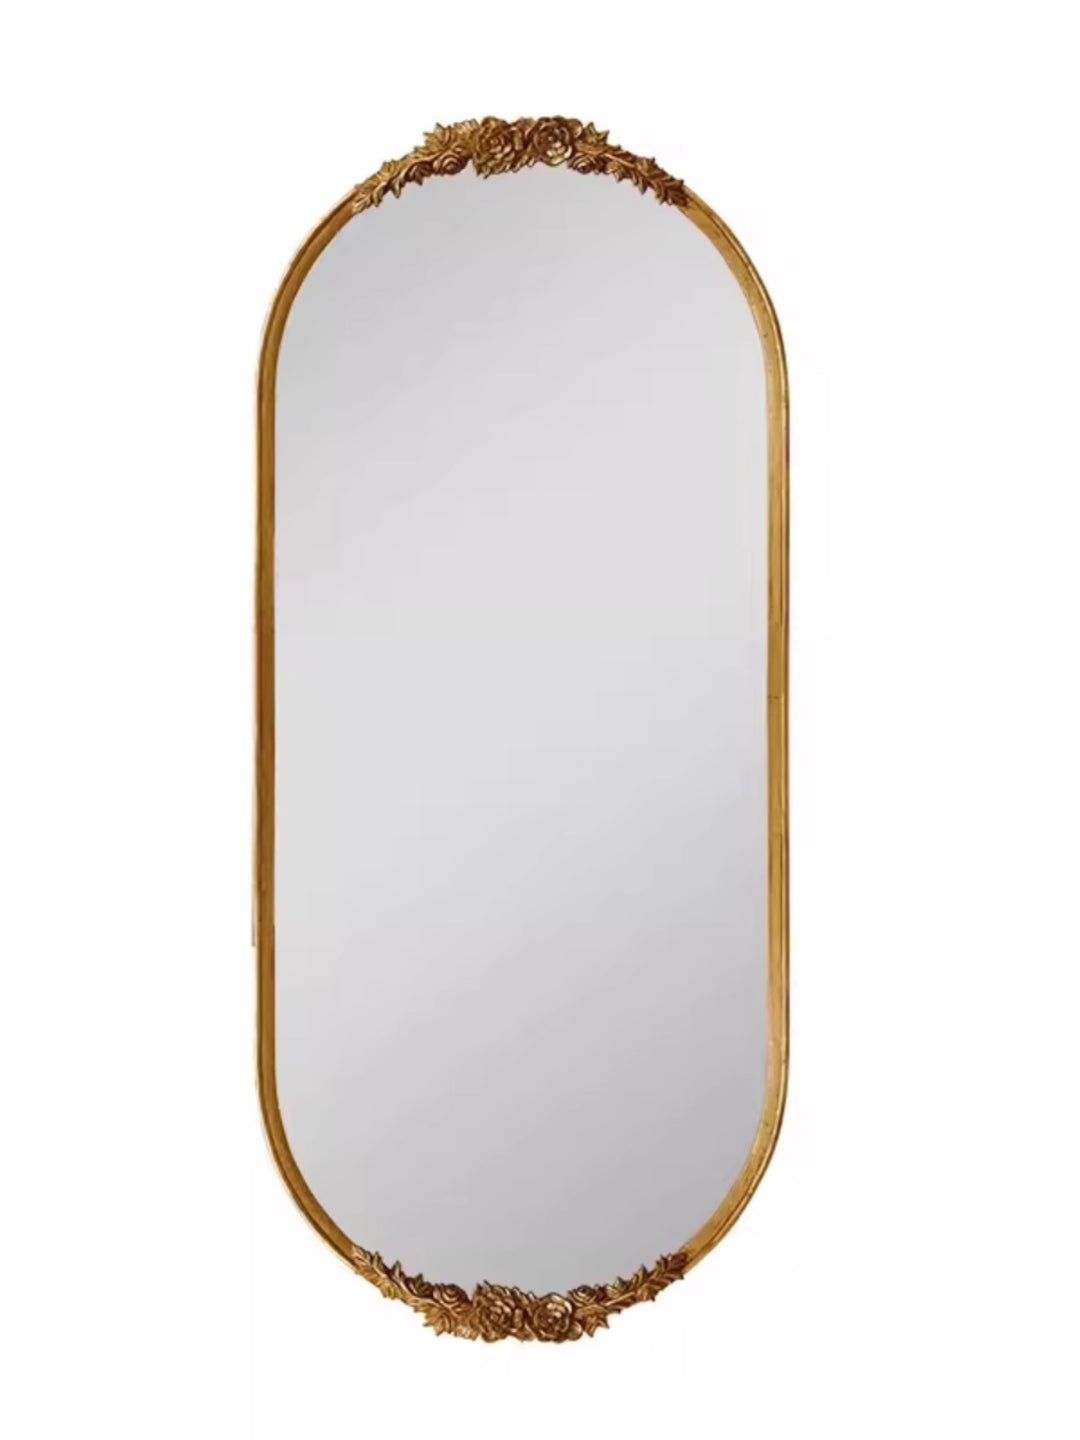 Retro Mirror Wall Hanging Carved Full-length Mirror